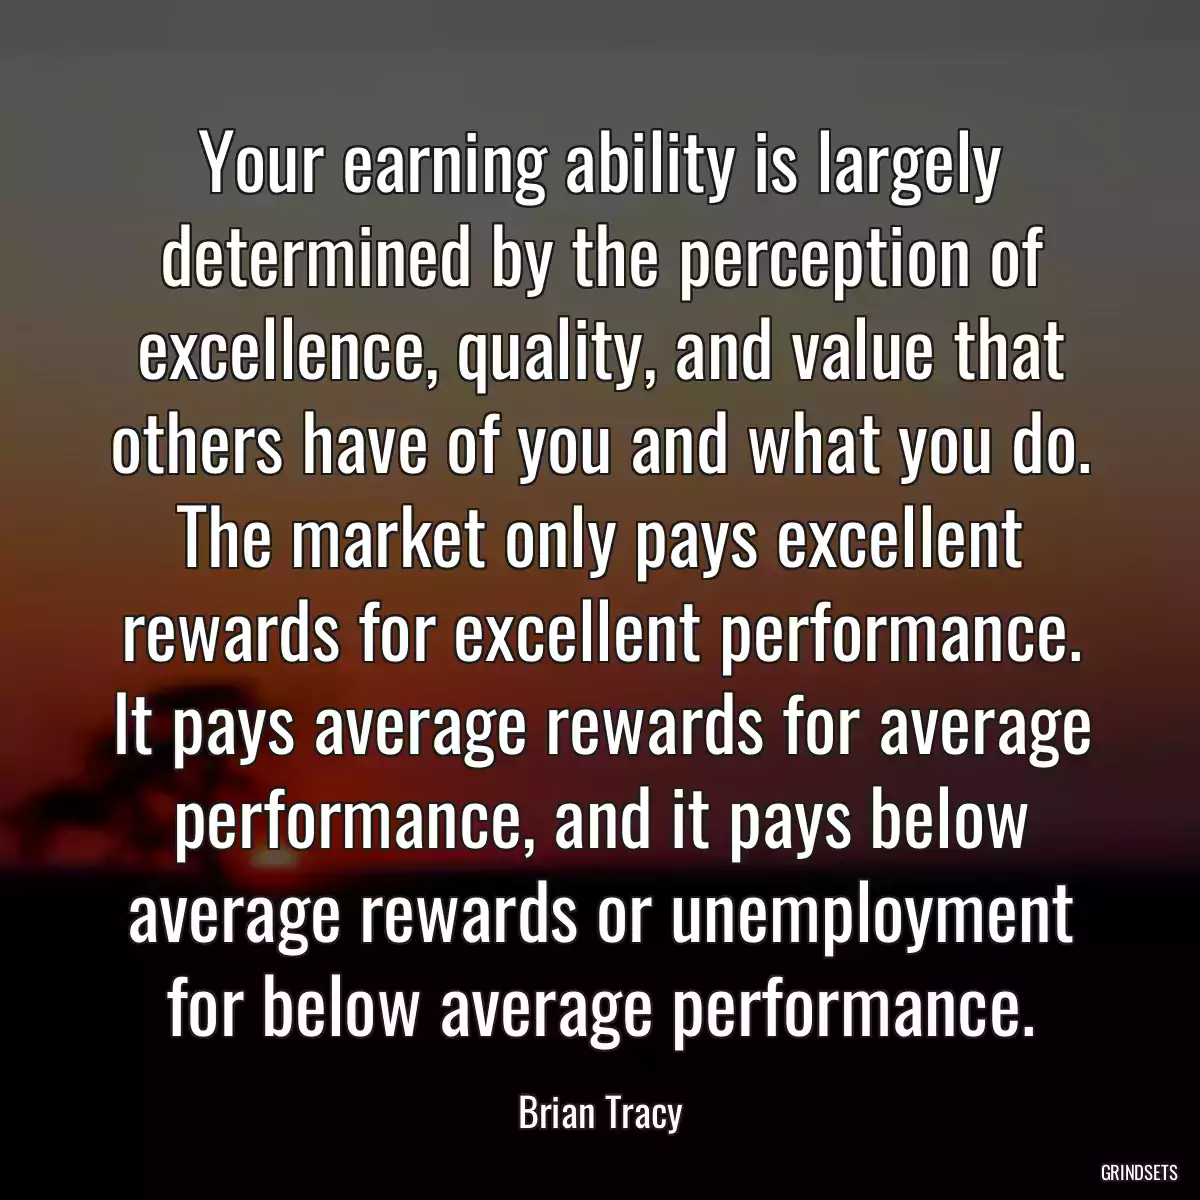 Your earning ability is largely determined by the perception of excellence, quality, and value that others have of you and what you do. The market only pays excellent rewards for excellent performance. It pays average rewards for average performance, and it pays below average rewards or unemployment for below average performance.